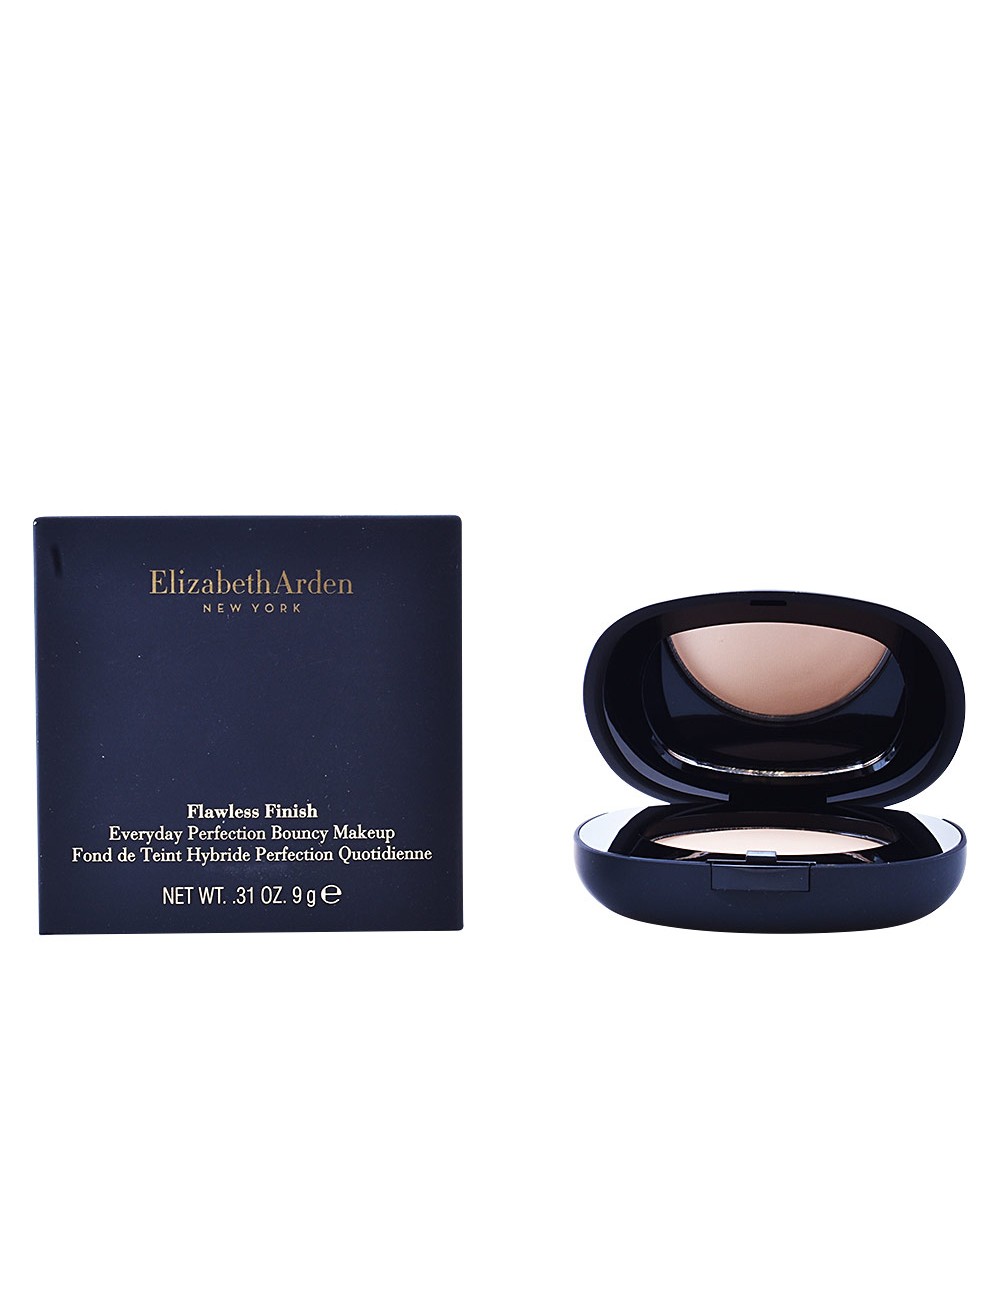 FLAWLESS FINISH everyday perfection makeup 04-shade